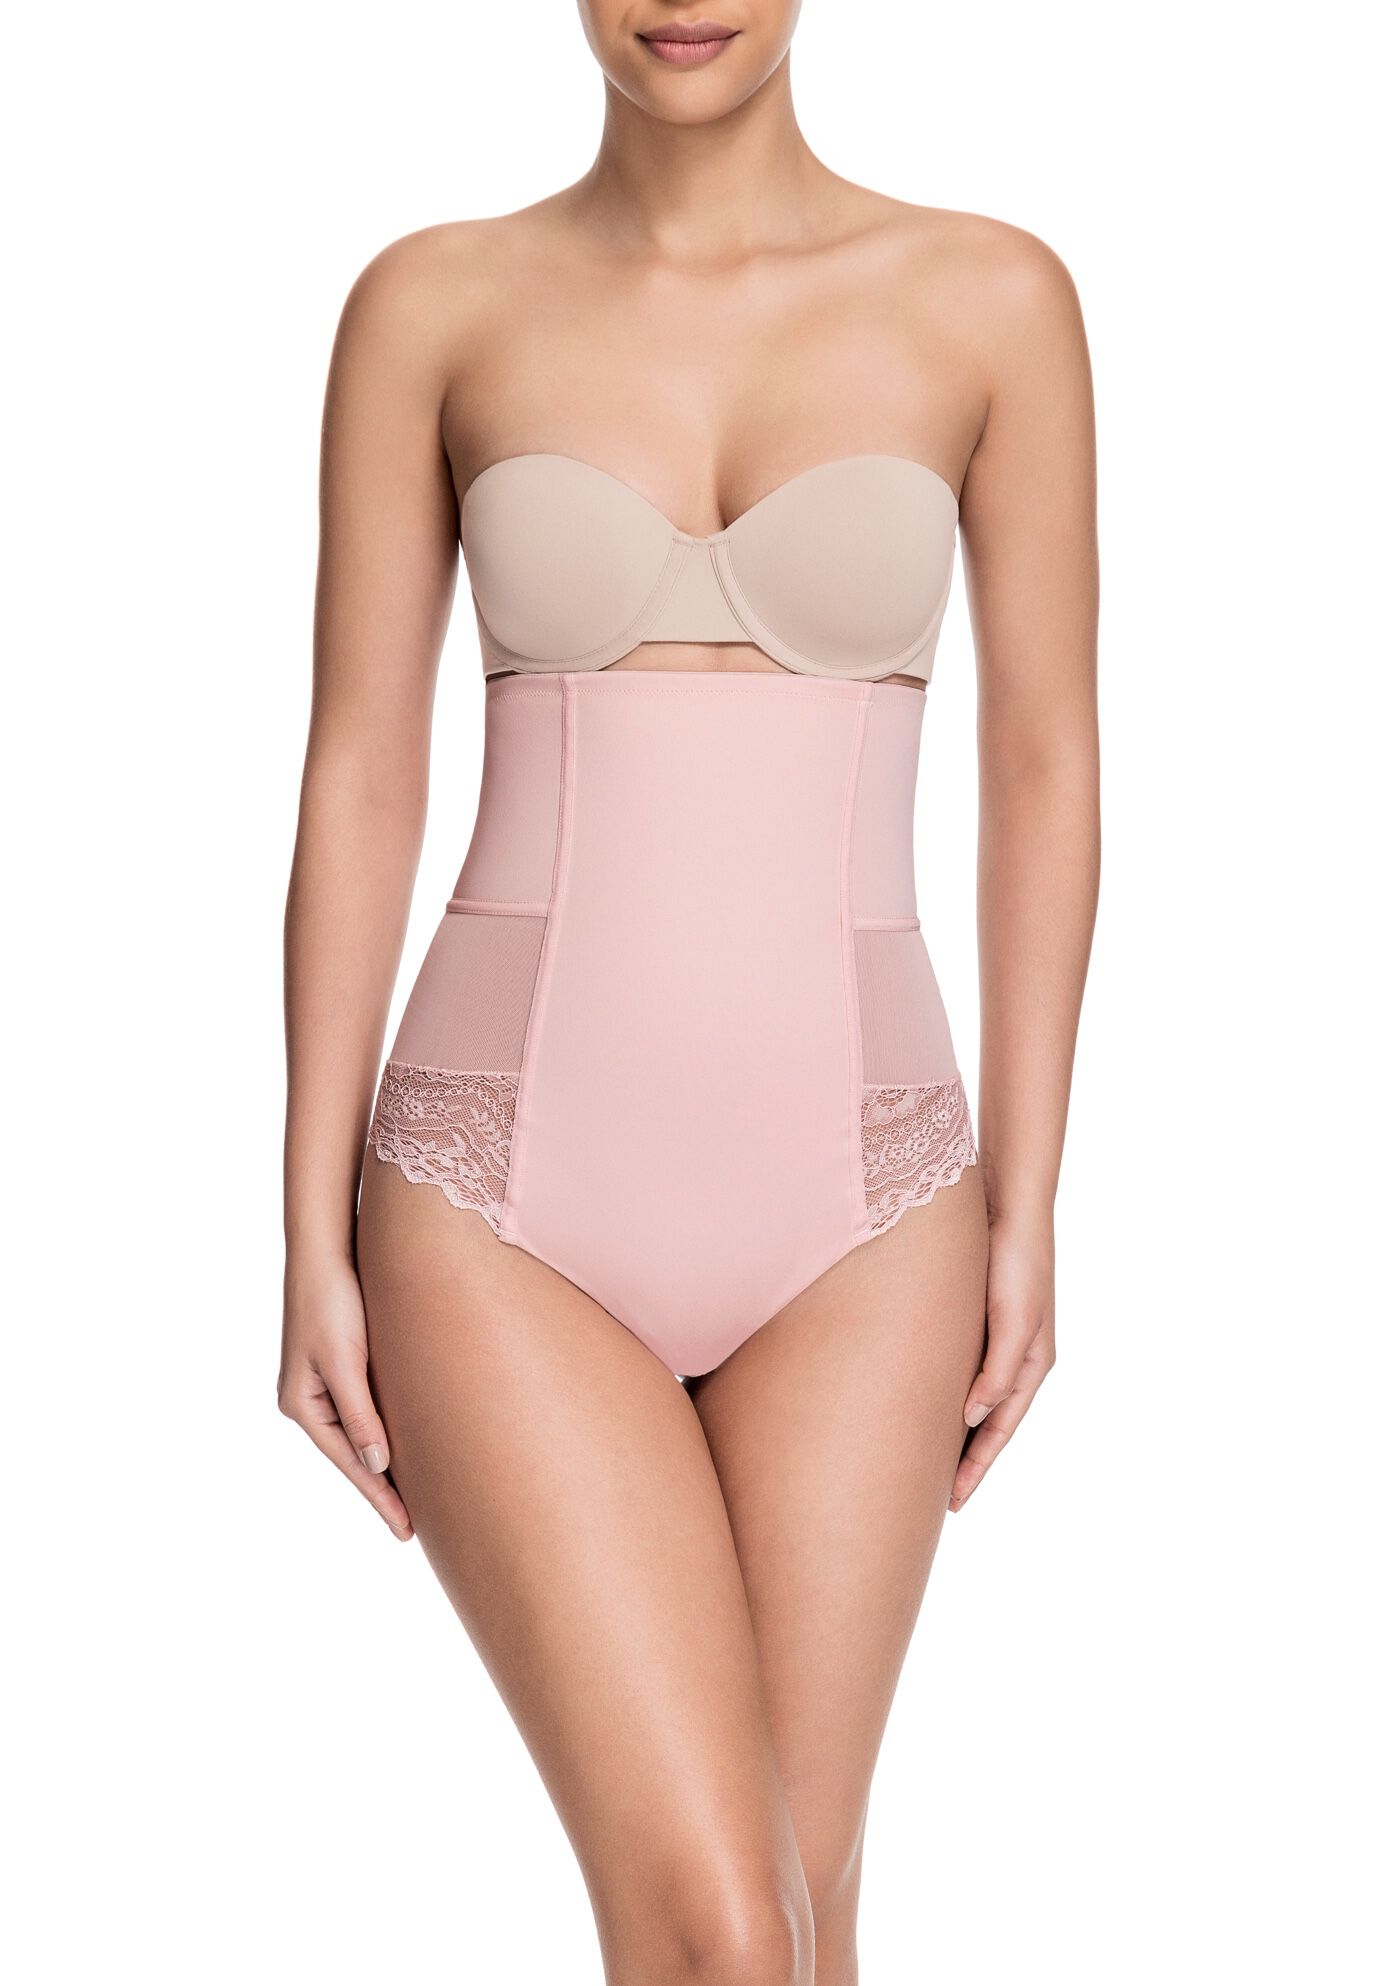 Plus Size Women's Brazilian Flair High Waist Thong by Squeem in Summer Blush (Size S)